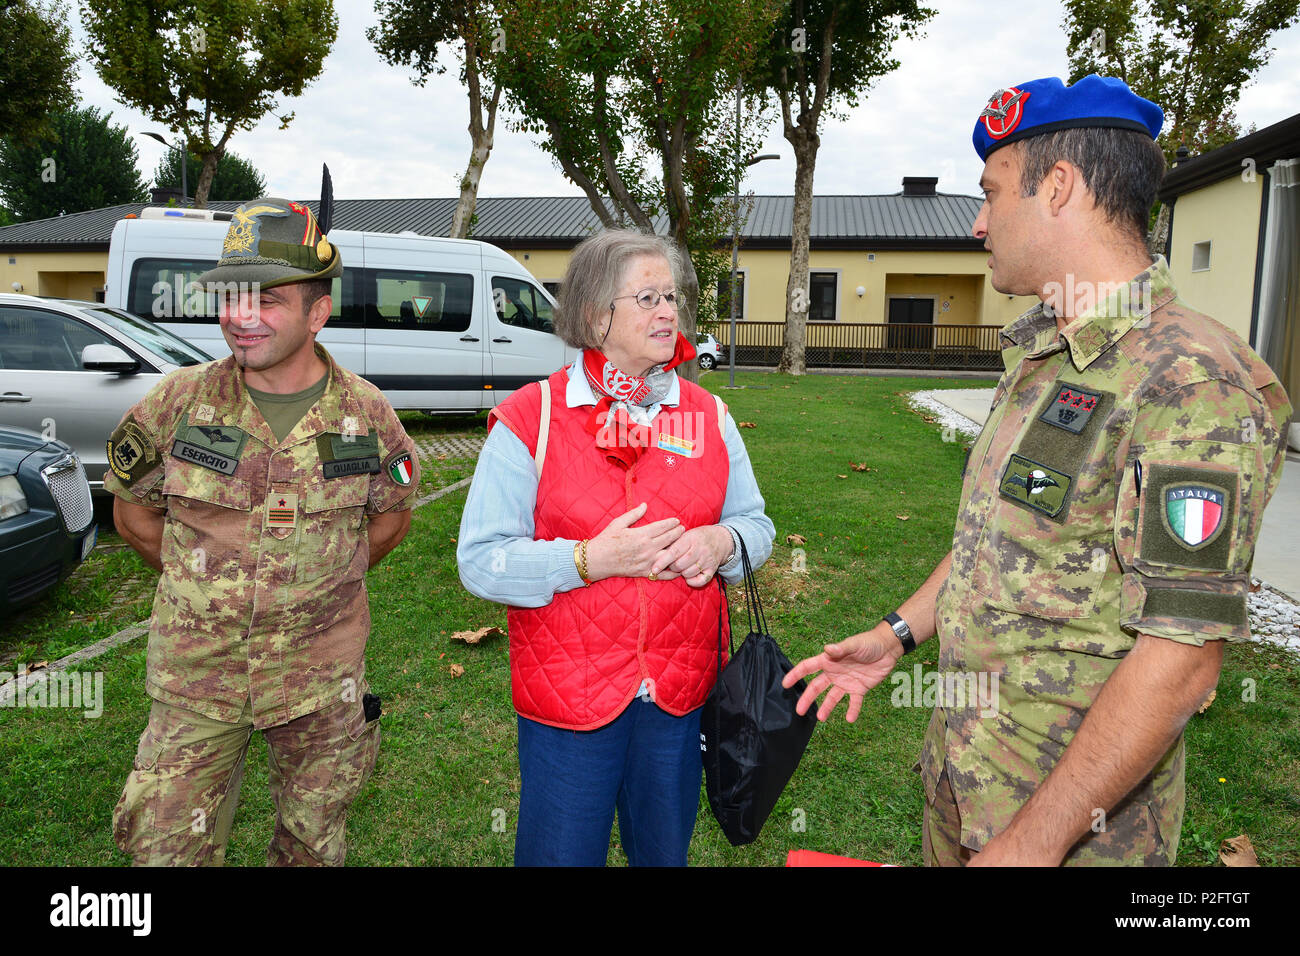 Colonel Umberto D’Andria, Italian Base Commander Caserma Ederle of Vicenza (right), Ms. Maria Giulia Medolago Albani, Sovereign Military Order of Malta (center) and Command Sergeant Major Antonio Quaglia, Command Sgt. Maj. Italian Base Commander (left),  during the visit at caserma Ederle, 22 Sept. 2016, Vicenza, Italy. The Sovereign Military Order of Malta (SMOM) or Order of Malta, is a Roman Catholic  Religious Order traditionally of military, chivalrous and noble nature for defense of Catholic faith and assistance to the poor. (U.S. Army photo by Visual Information Specialist Paolo Bovo/Rel Stock Photo